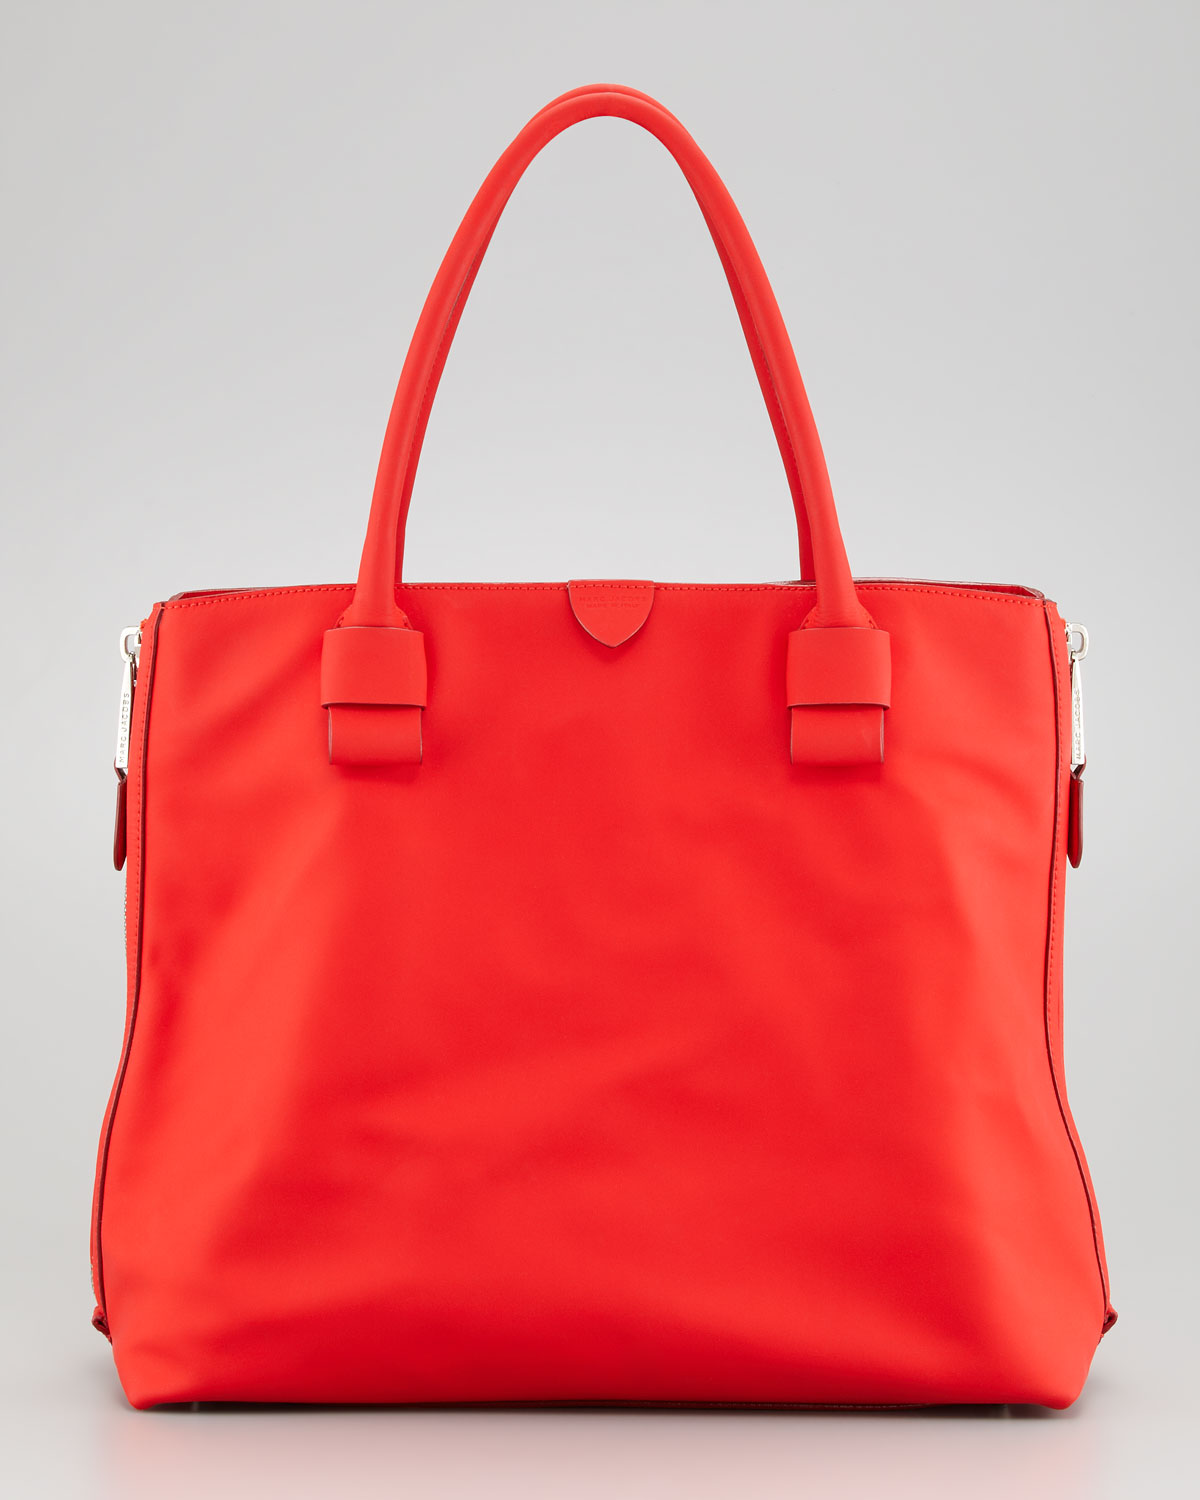 Lyst - Marc Jacobs The Sheila Tote Bag Red in Red